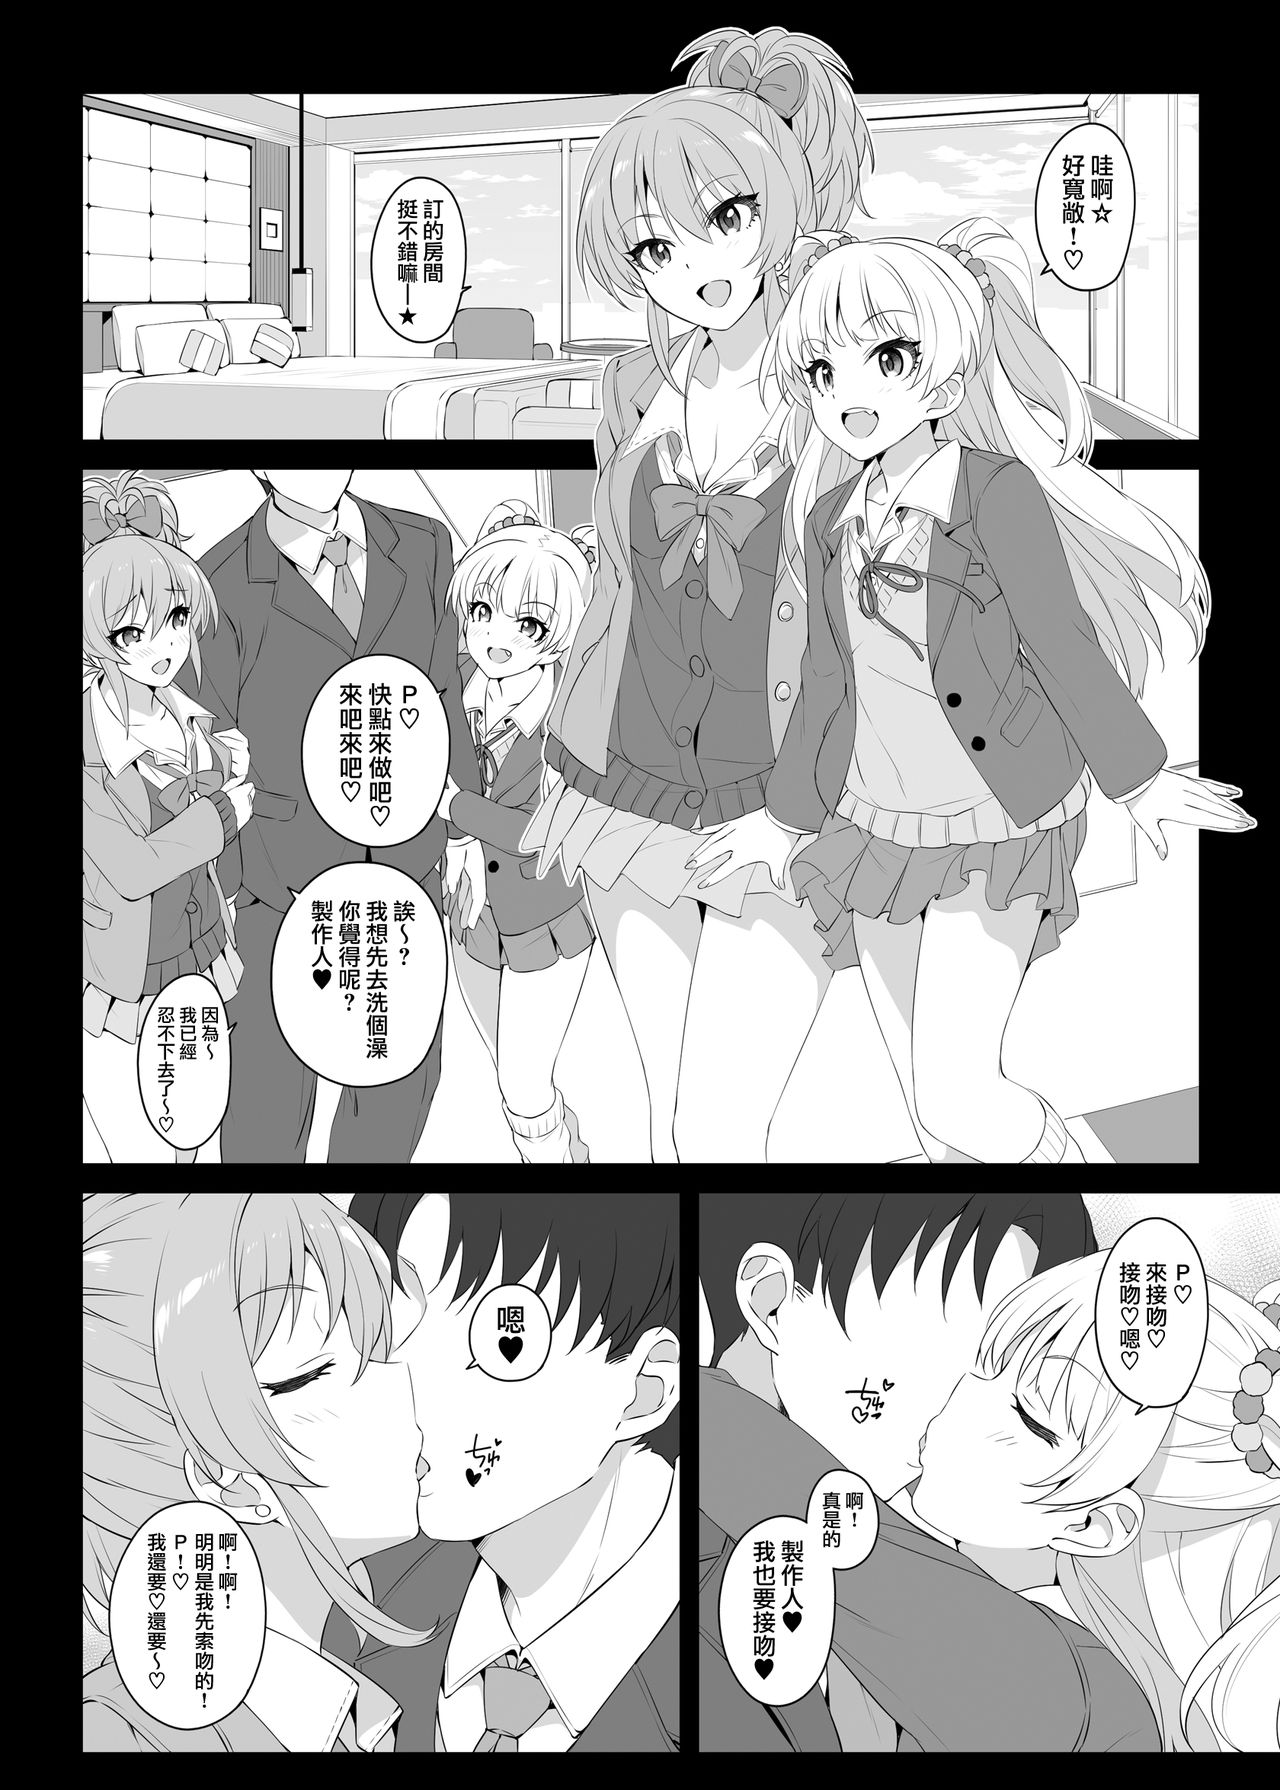 [Jekyll and Hyde (MAKOTO)] The first secret meeting of the Charismatic Queens. (THE IDOLM@STER CINDERELLA GIRLS) [Chinese] [無邪気漢化組] [Digital] page 8 full